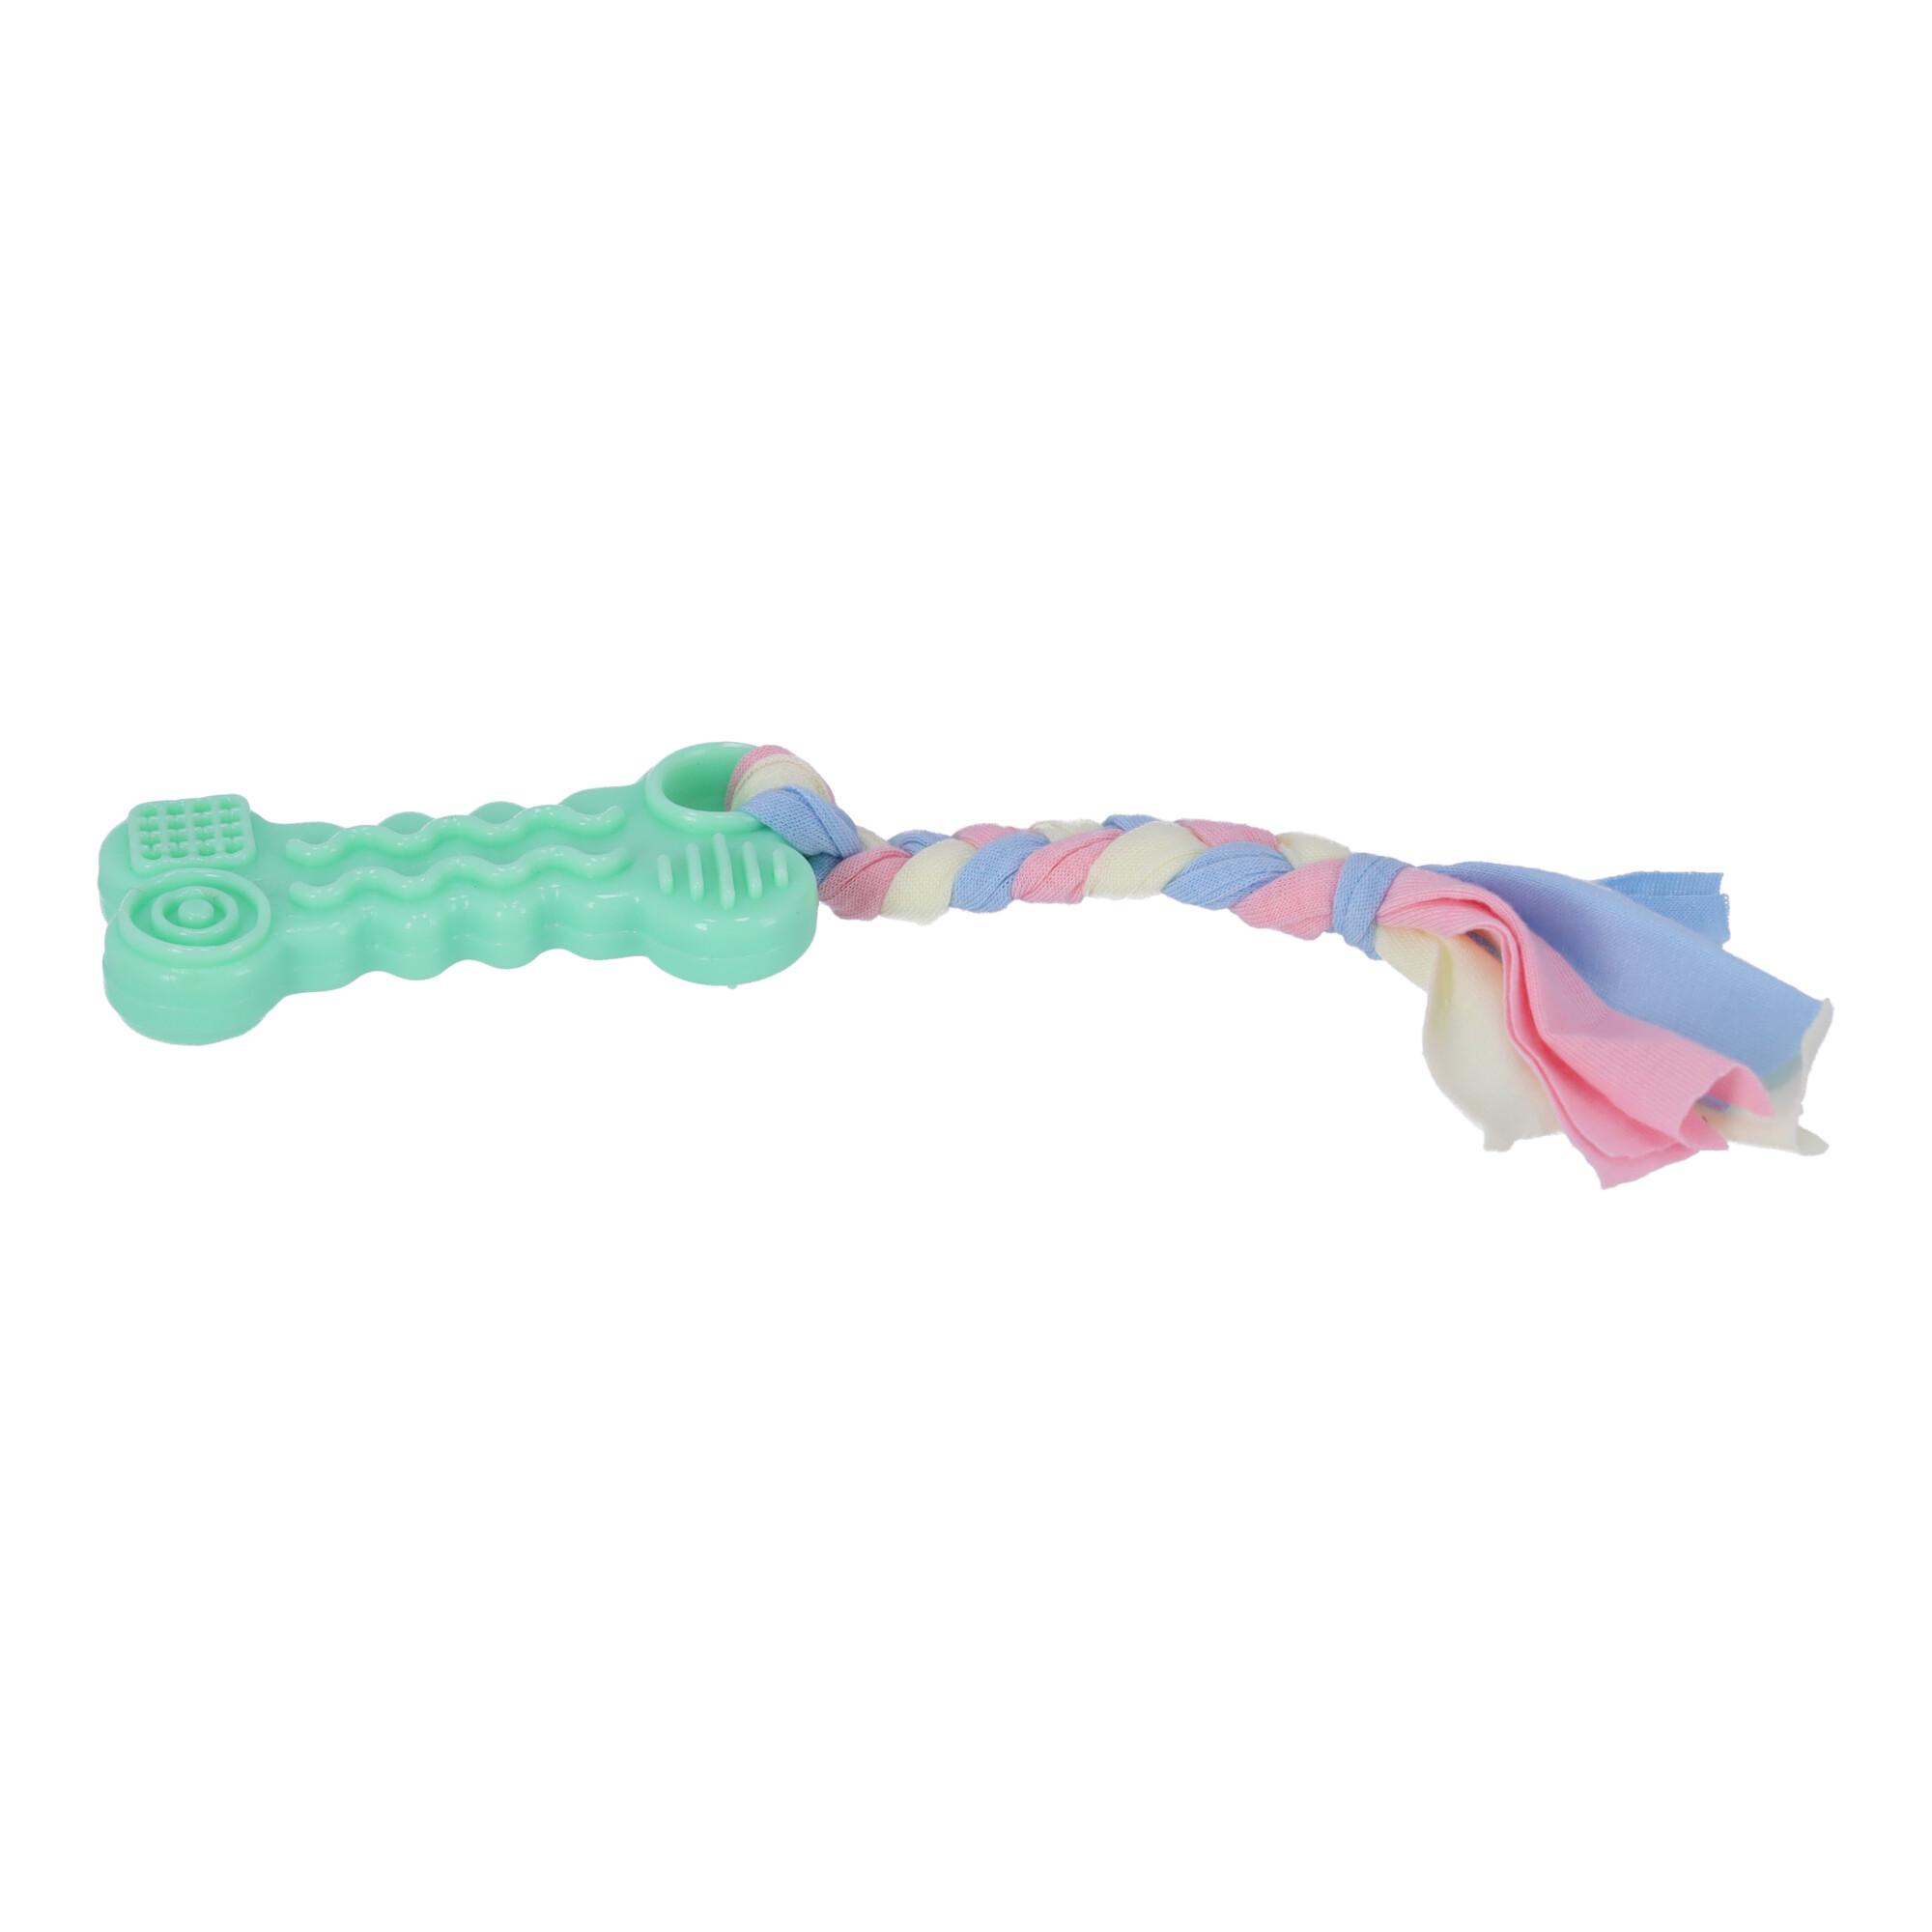 Colorful dog toy - chew with string, green